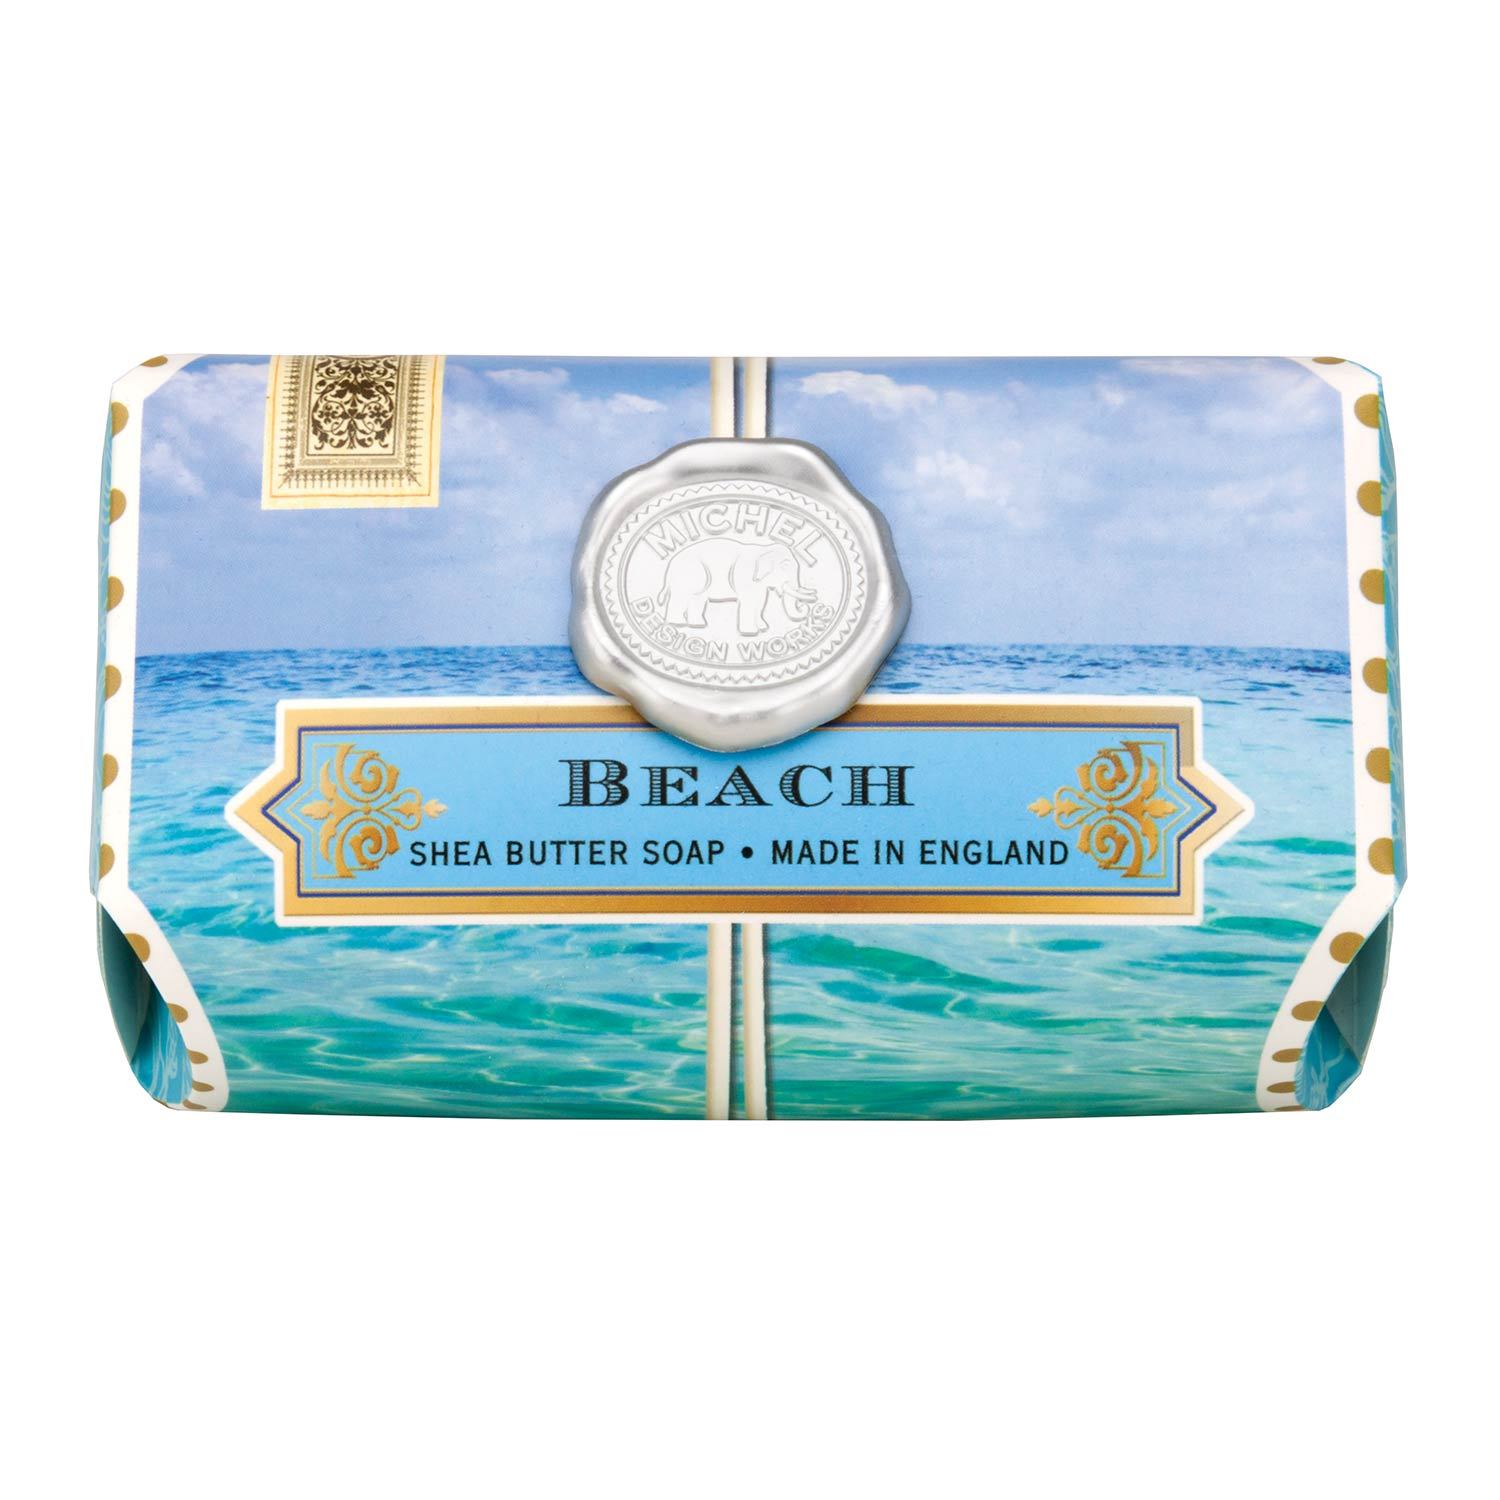 BEACH SHEA BUTTER SOAP SOAL189 - Molly's! A Chic and Unique Boutique 